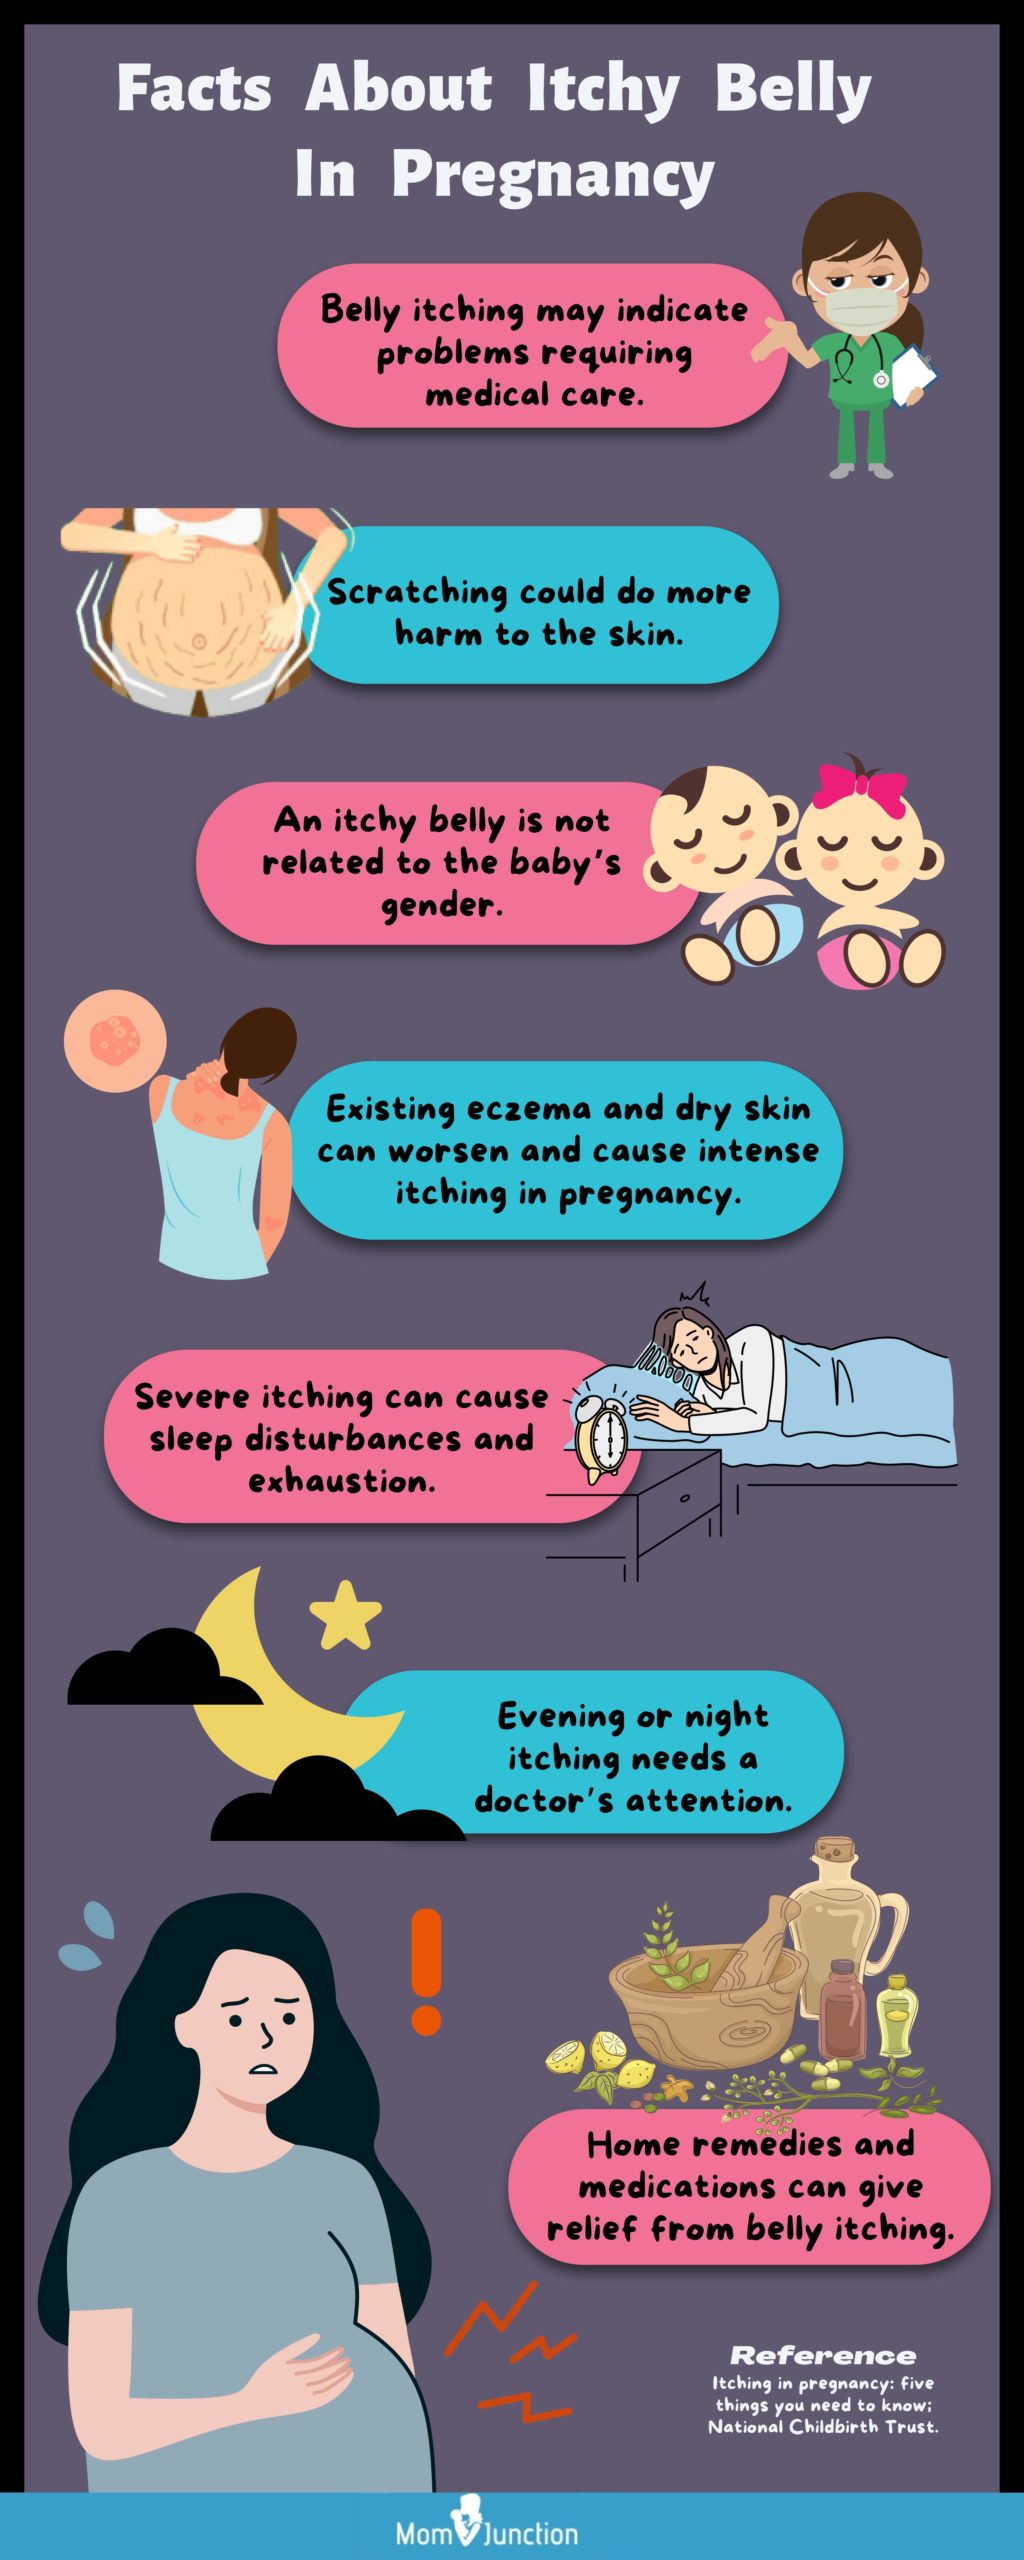 facts about itchy belly in pregnancy [infographic]